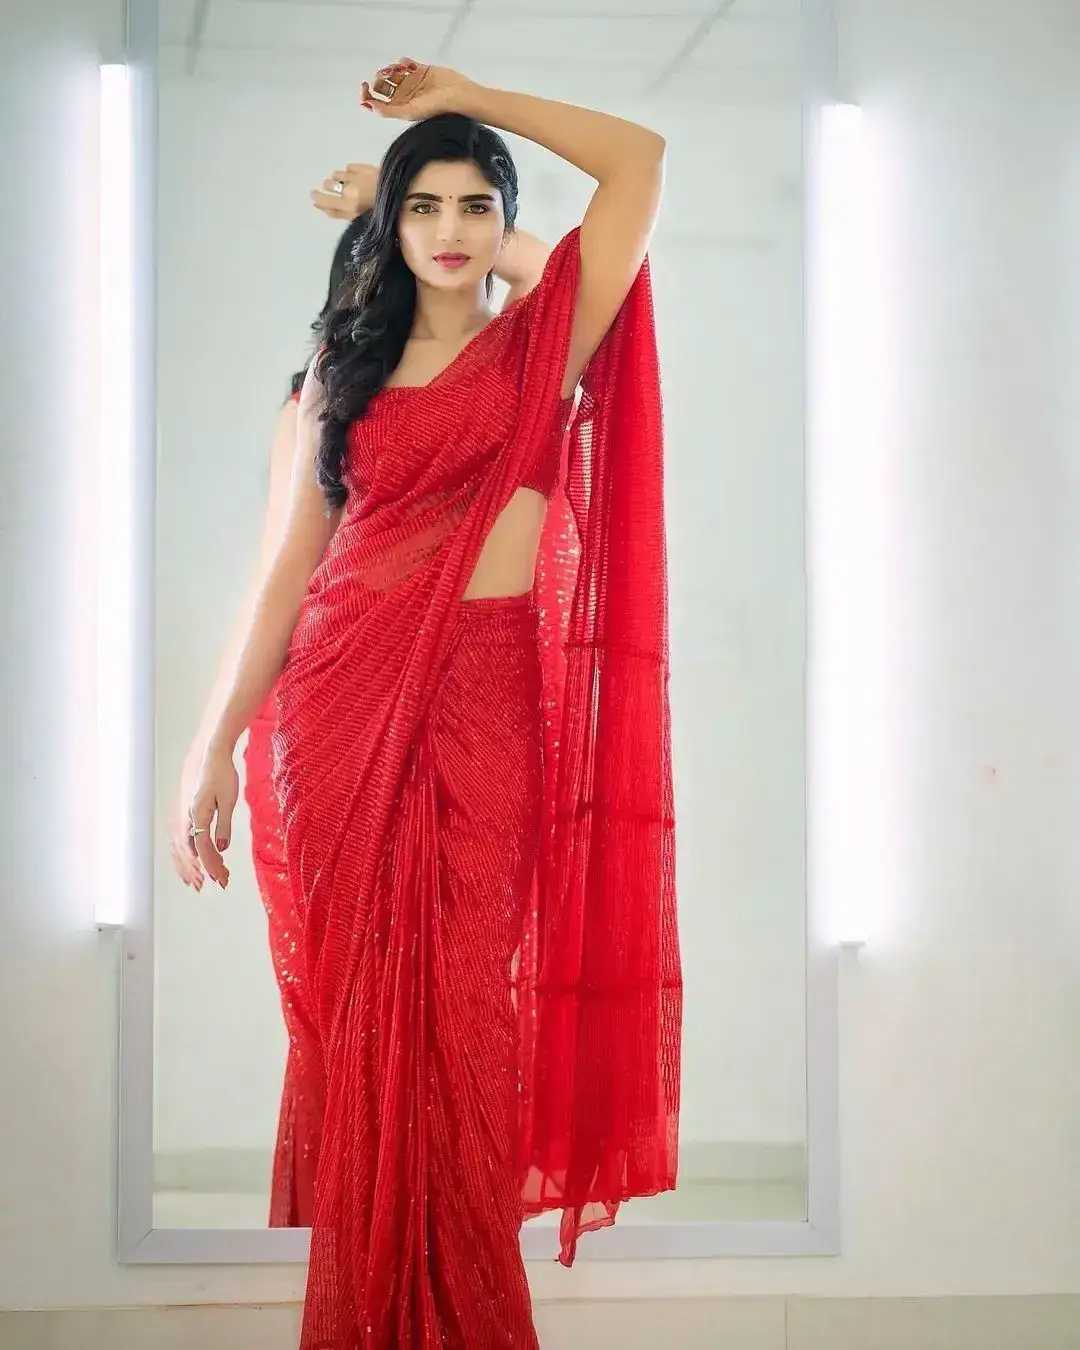 INDIAN ACTRESS JABARDASTH VARSHA IMAGES IN RED COLOUR SAREE